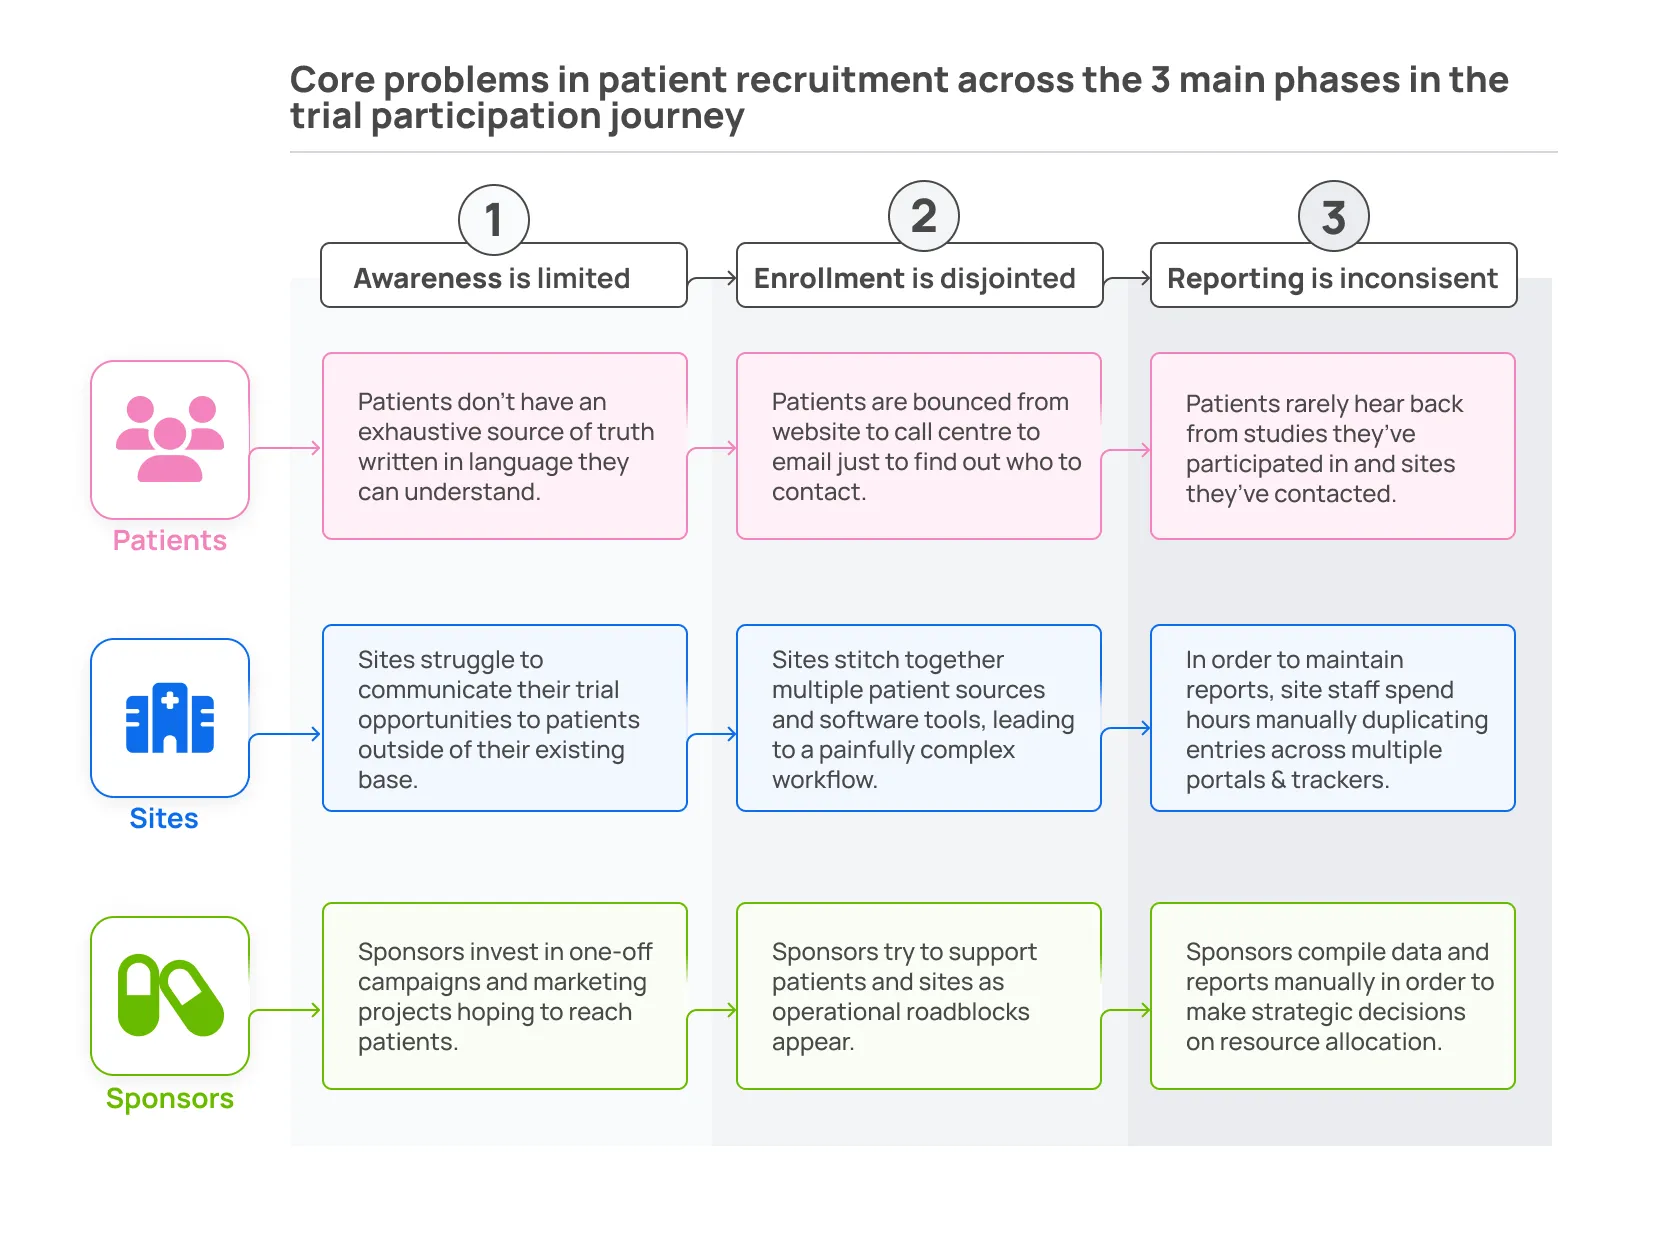 Core problems in patient recruitment across the 3 main phases in the trial participation journey